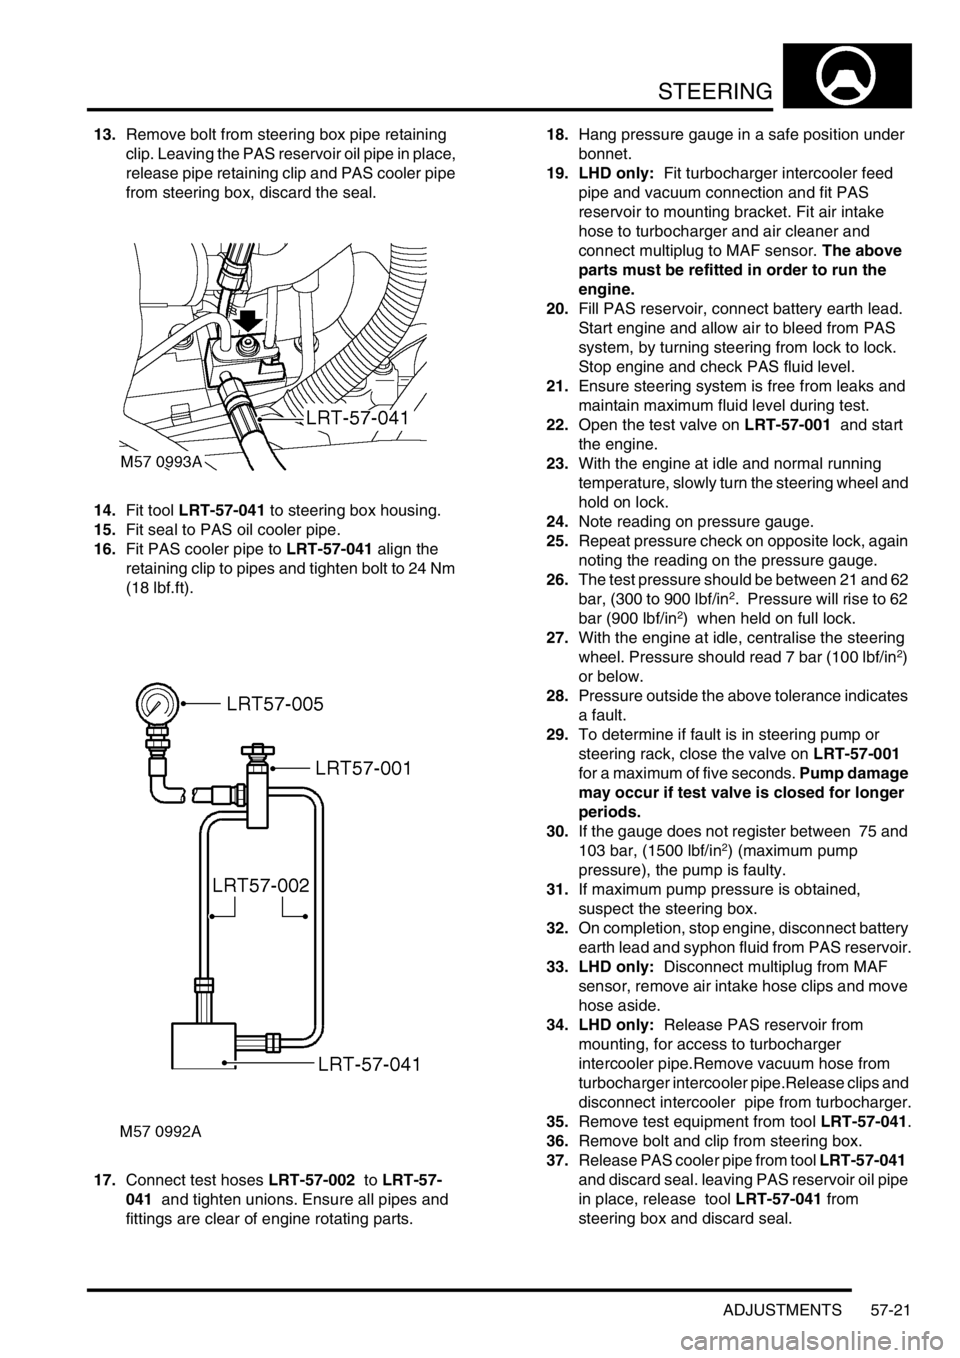 LAND ROVER DISCOVERY 2002 Owners Manual STEERING
ADJUSTMENTS 57-21
13.Remove bolt from steering box pipe retaining 
clip. Leaving the PAS reservoir oil pipe in place, 
release pipe retaining clip and PAS cooler pipe 
from steering box, disc